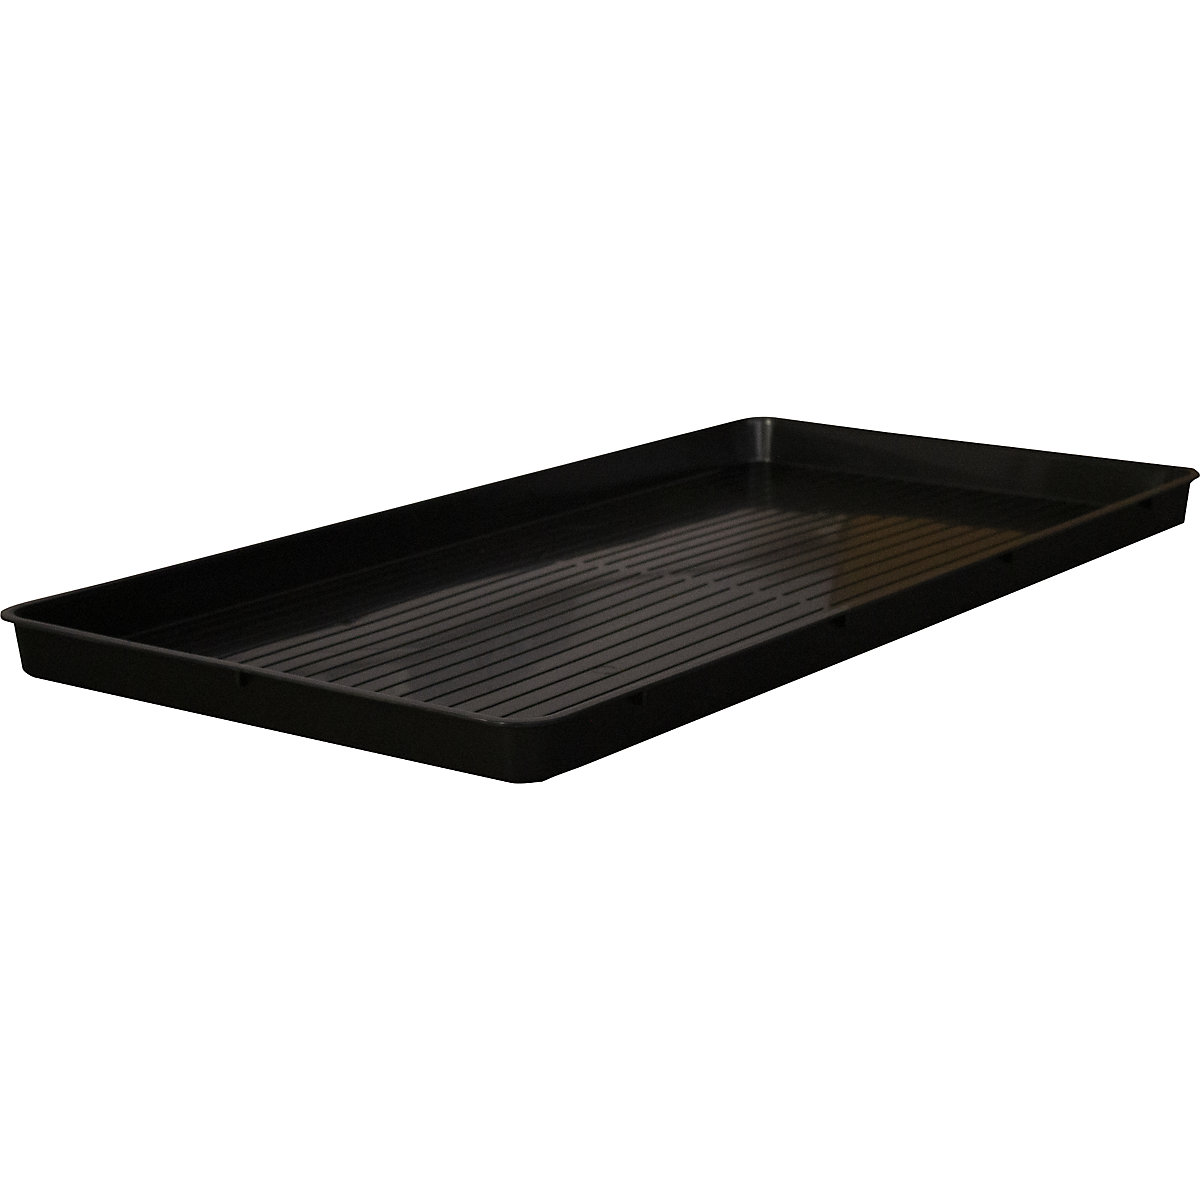 PE sump tray for small containers – eurokraft basic